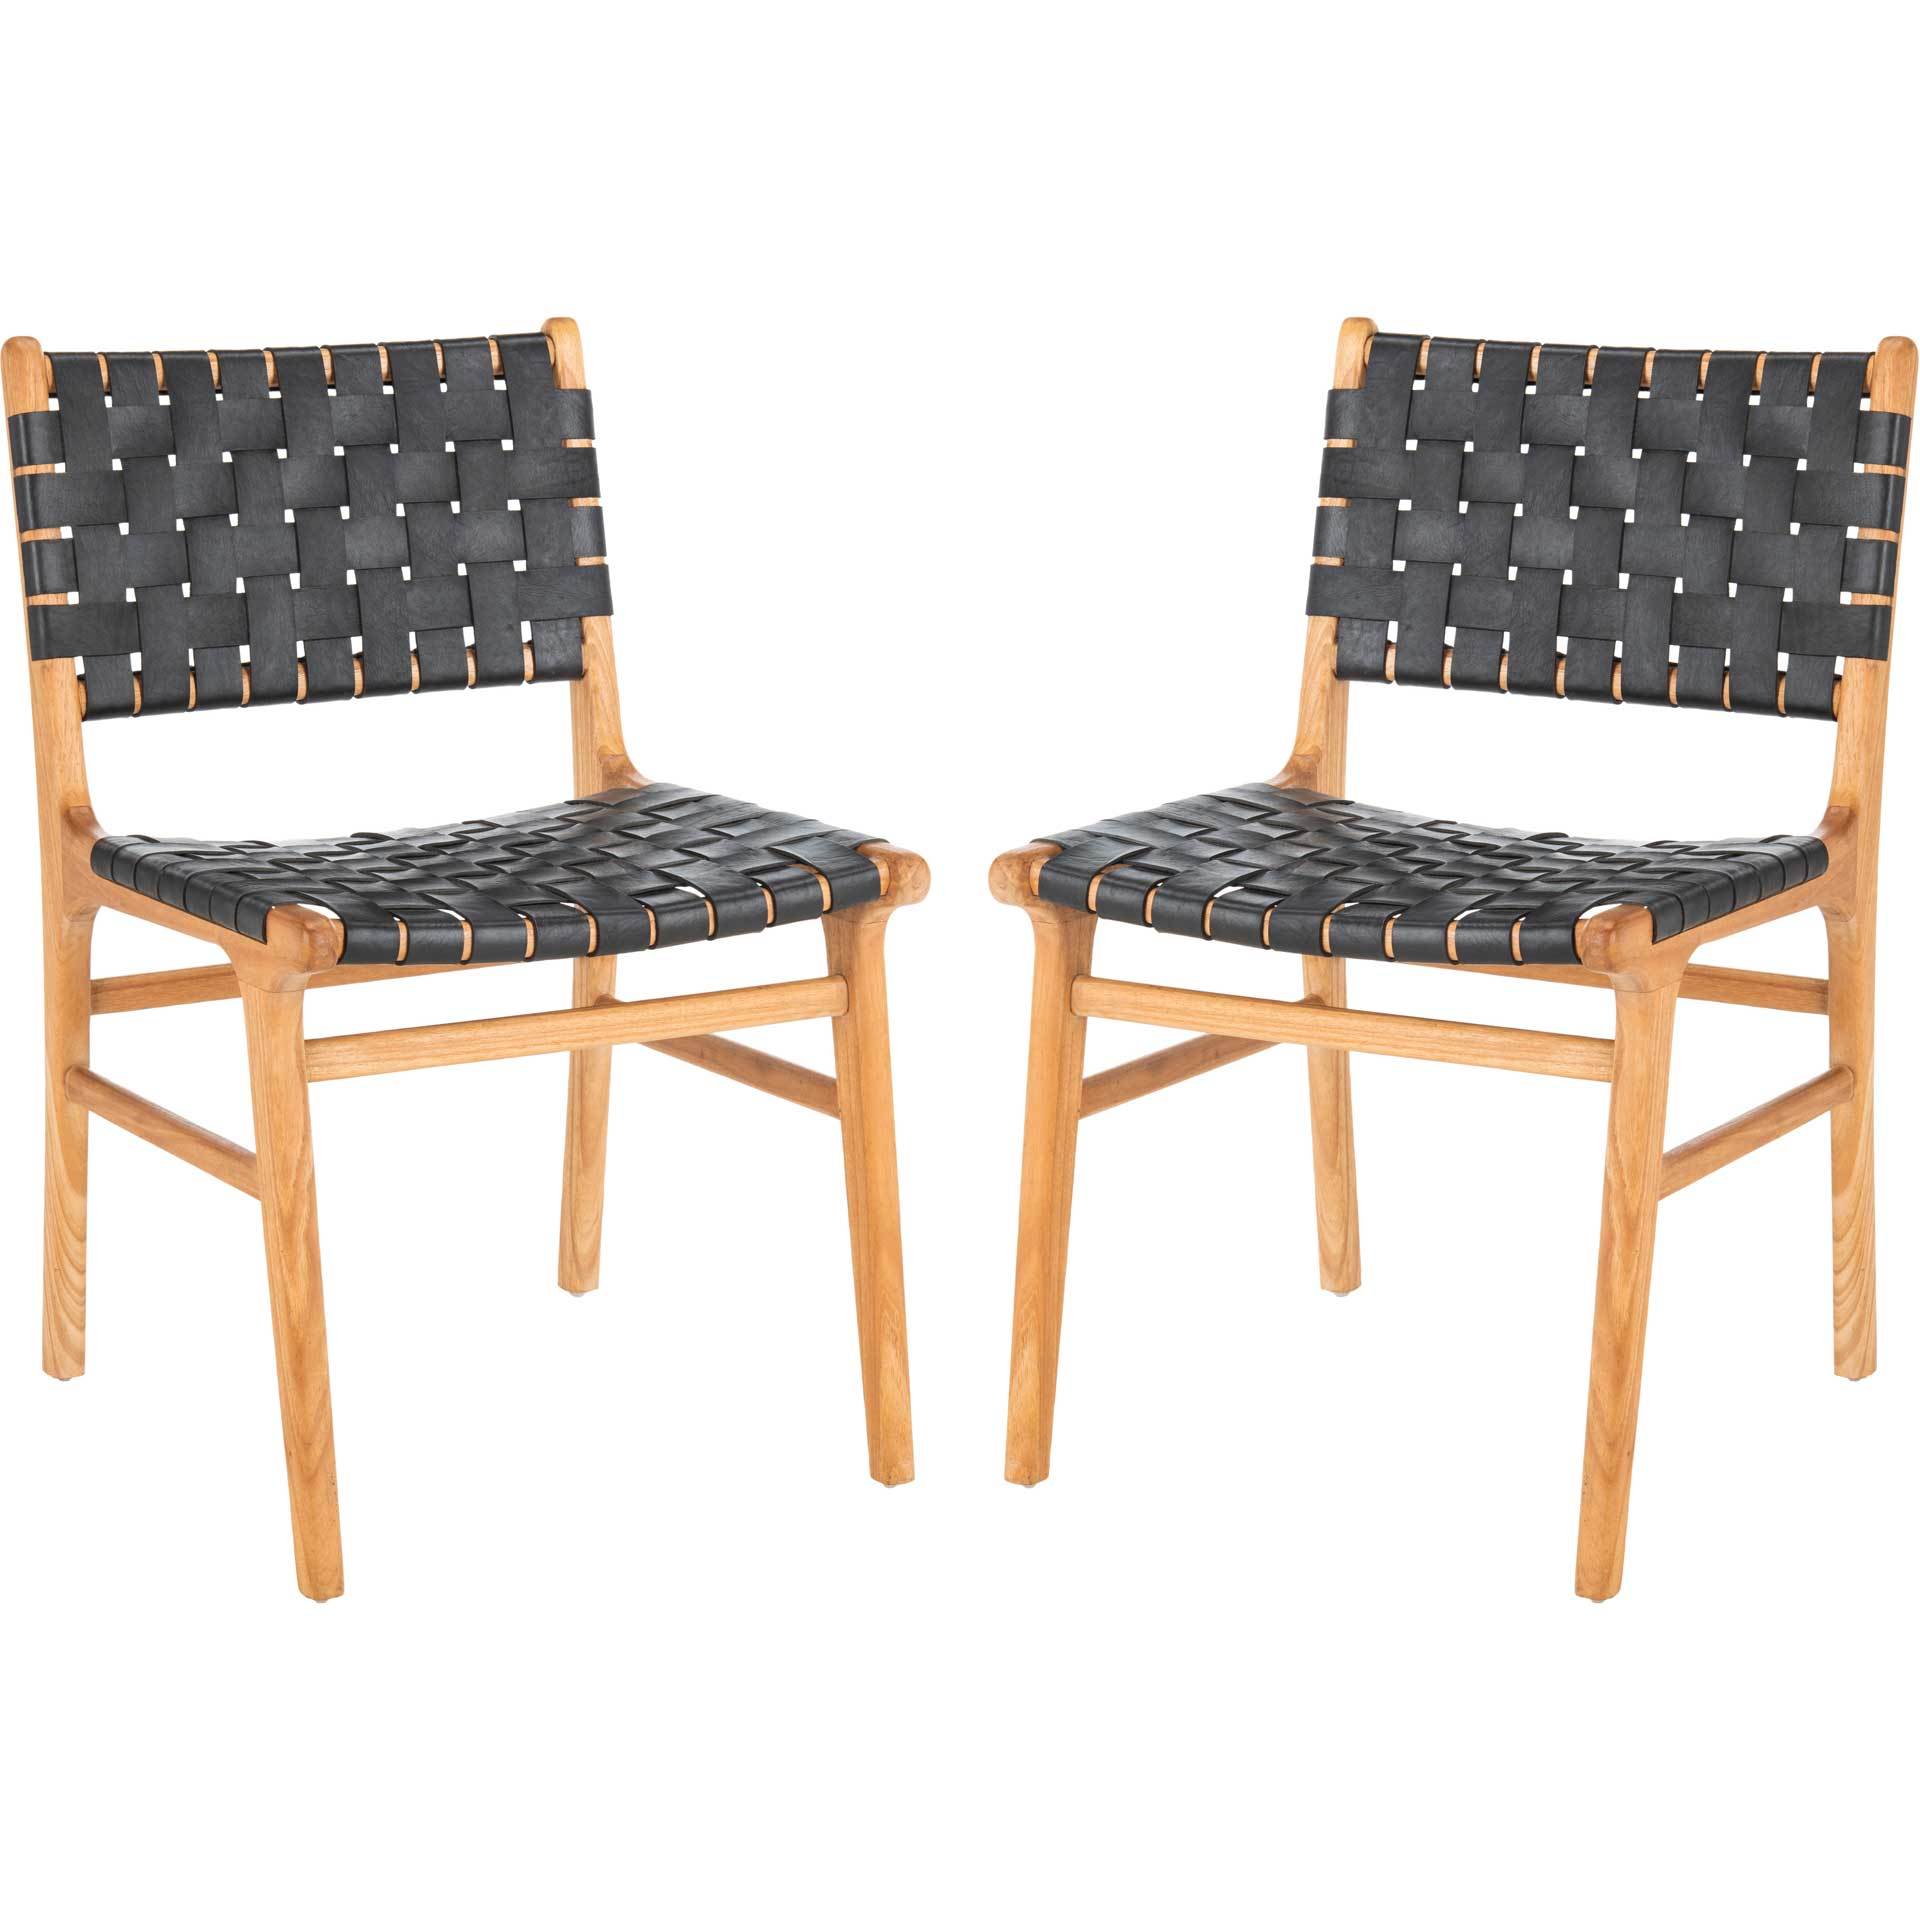 Tara Leather Dining Chair Black/Natural (Set of 2)